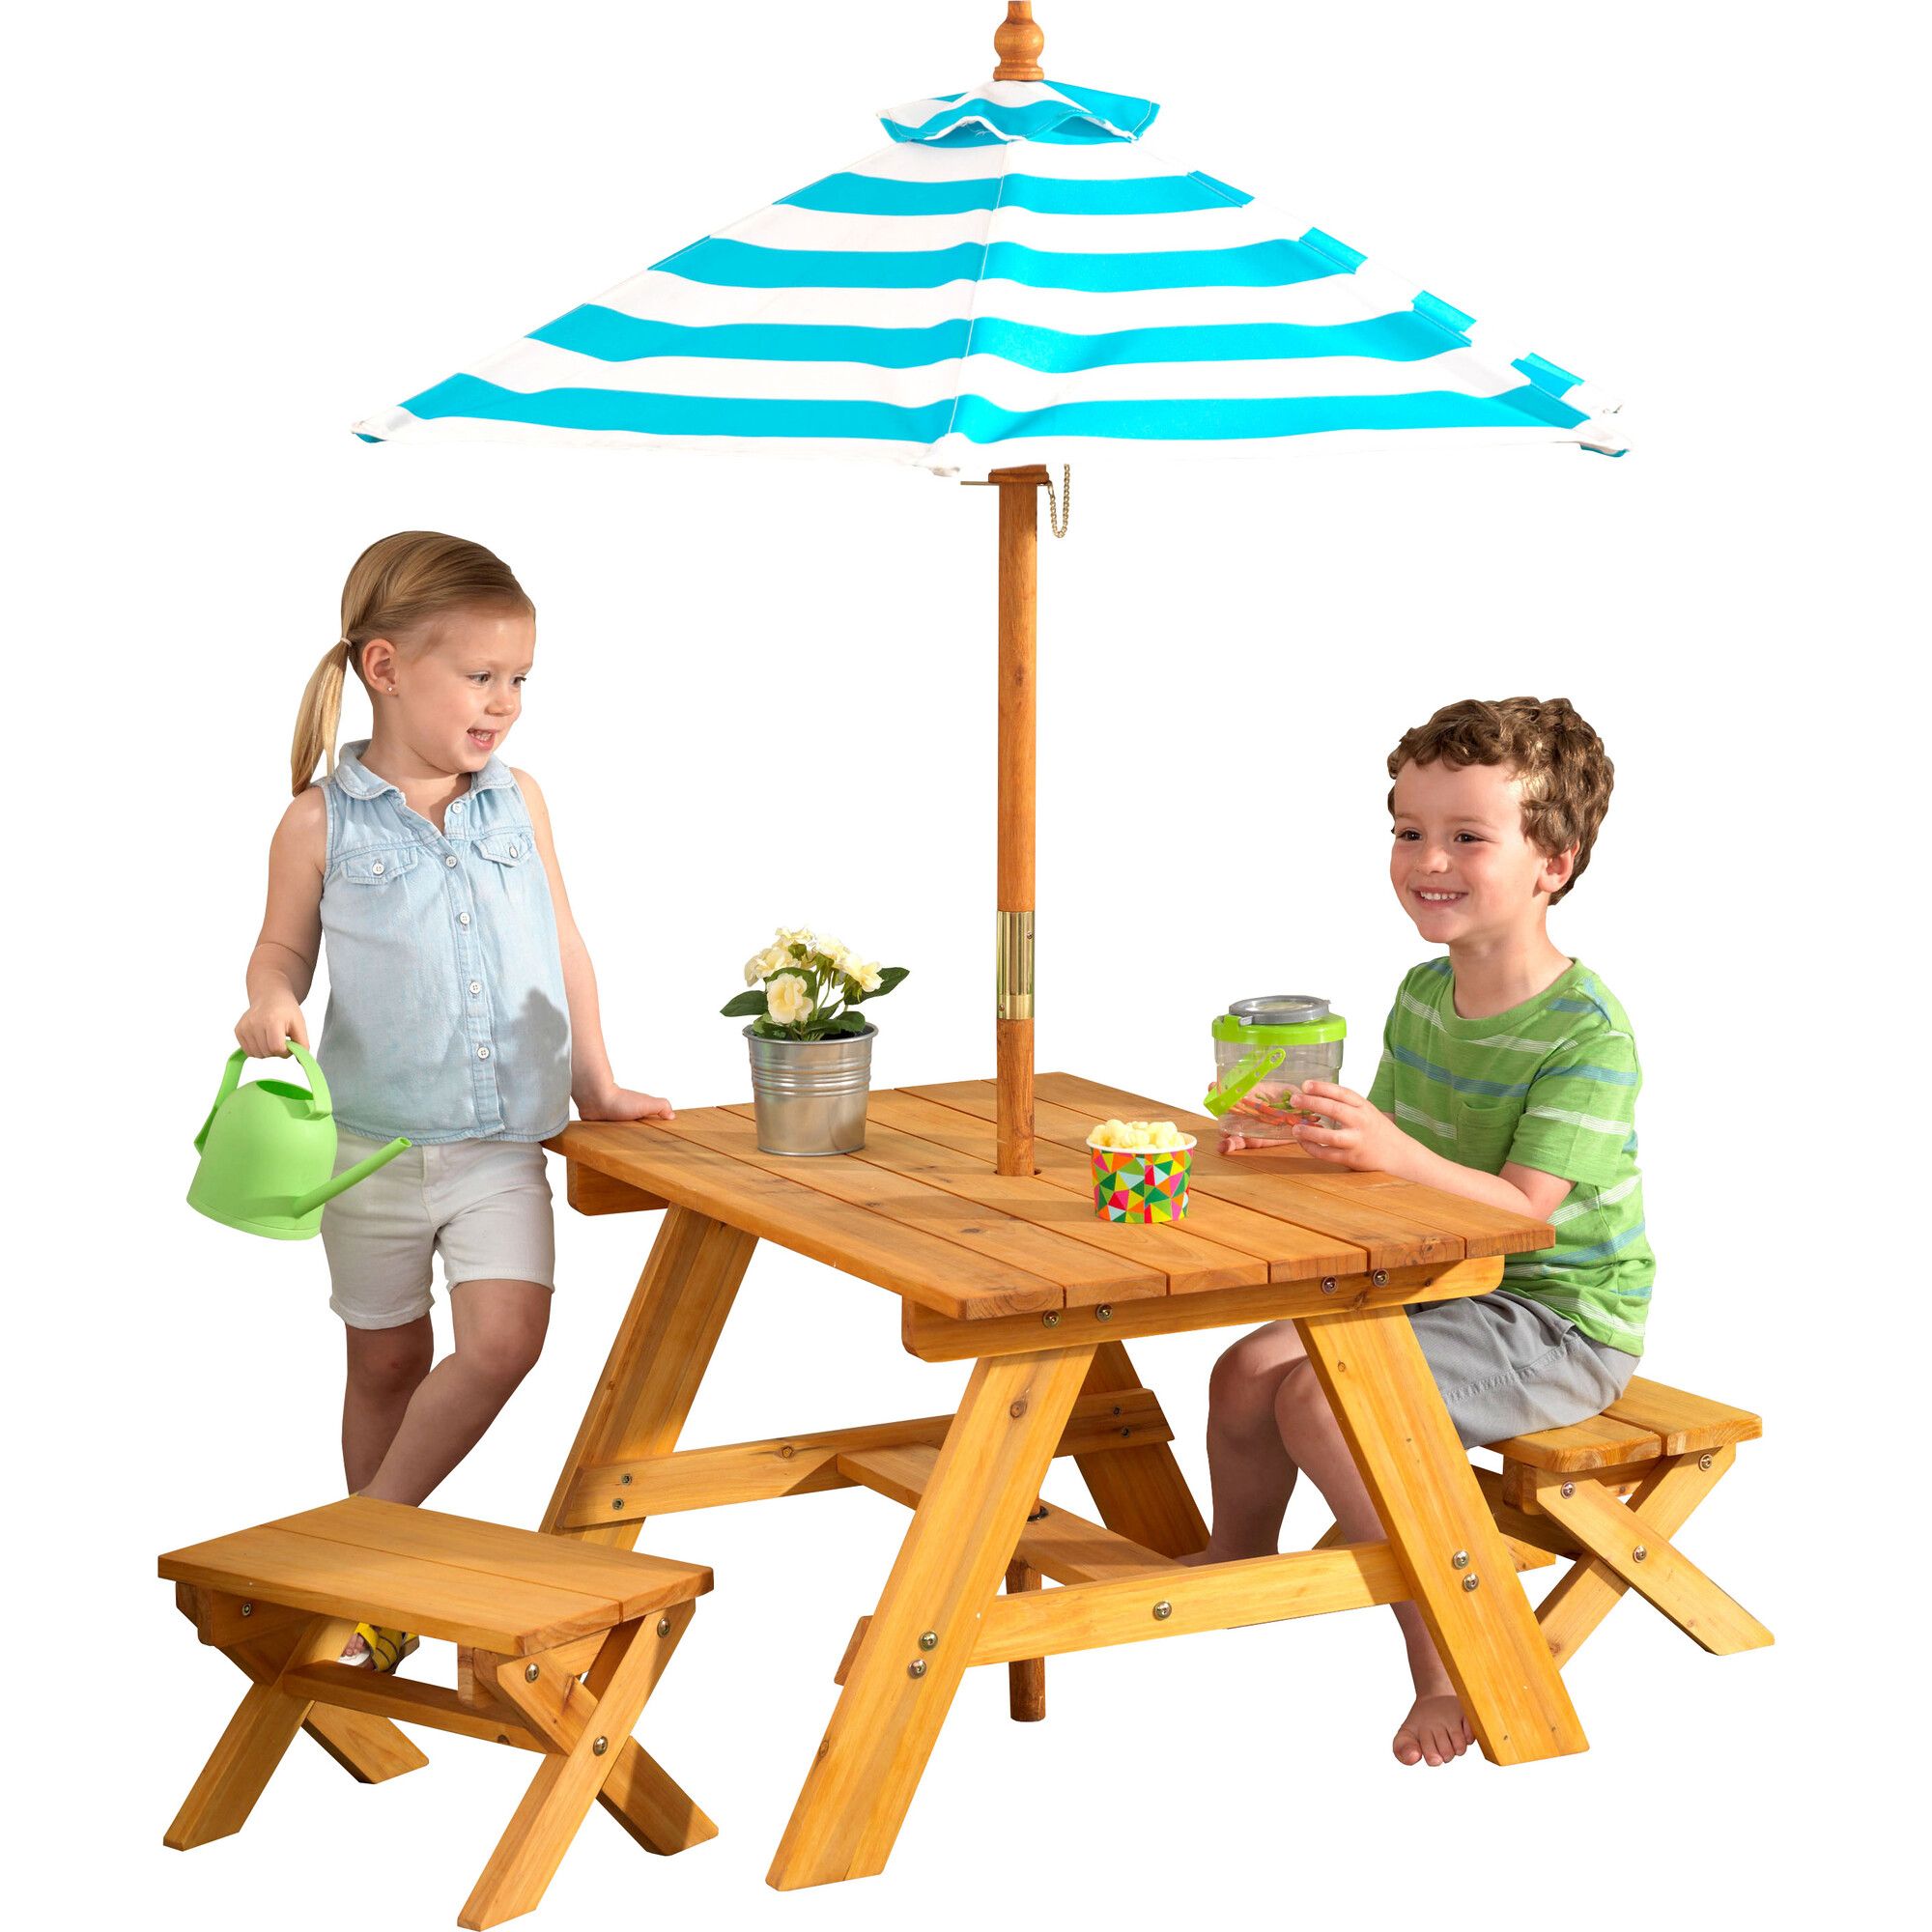 Outdoor Table and Bench Set with Umbrella, Turquoise/White | Maisonette